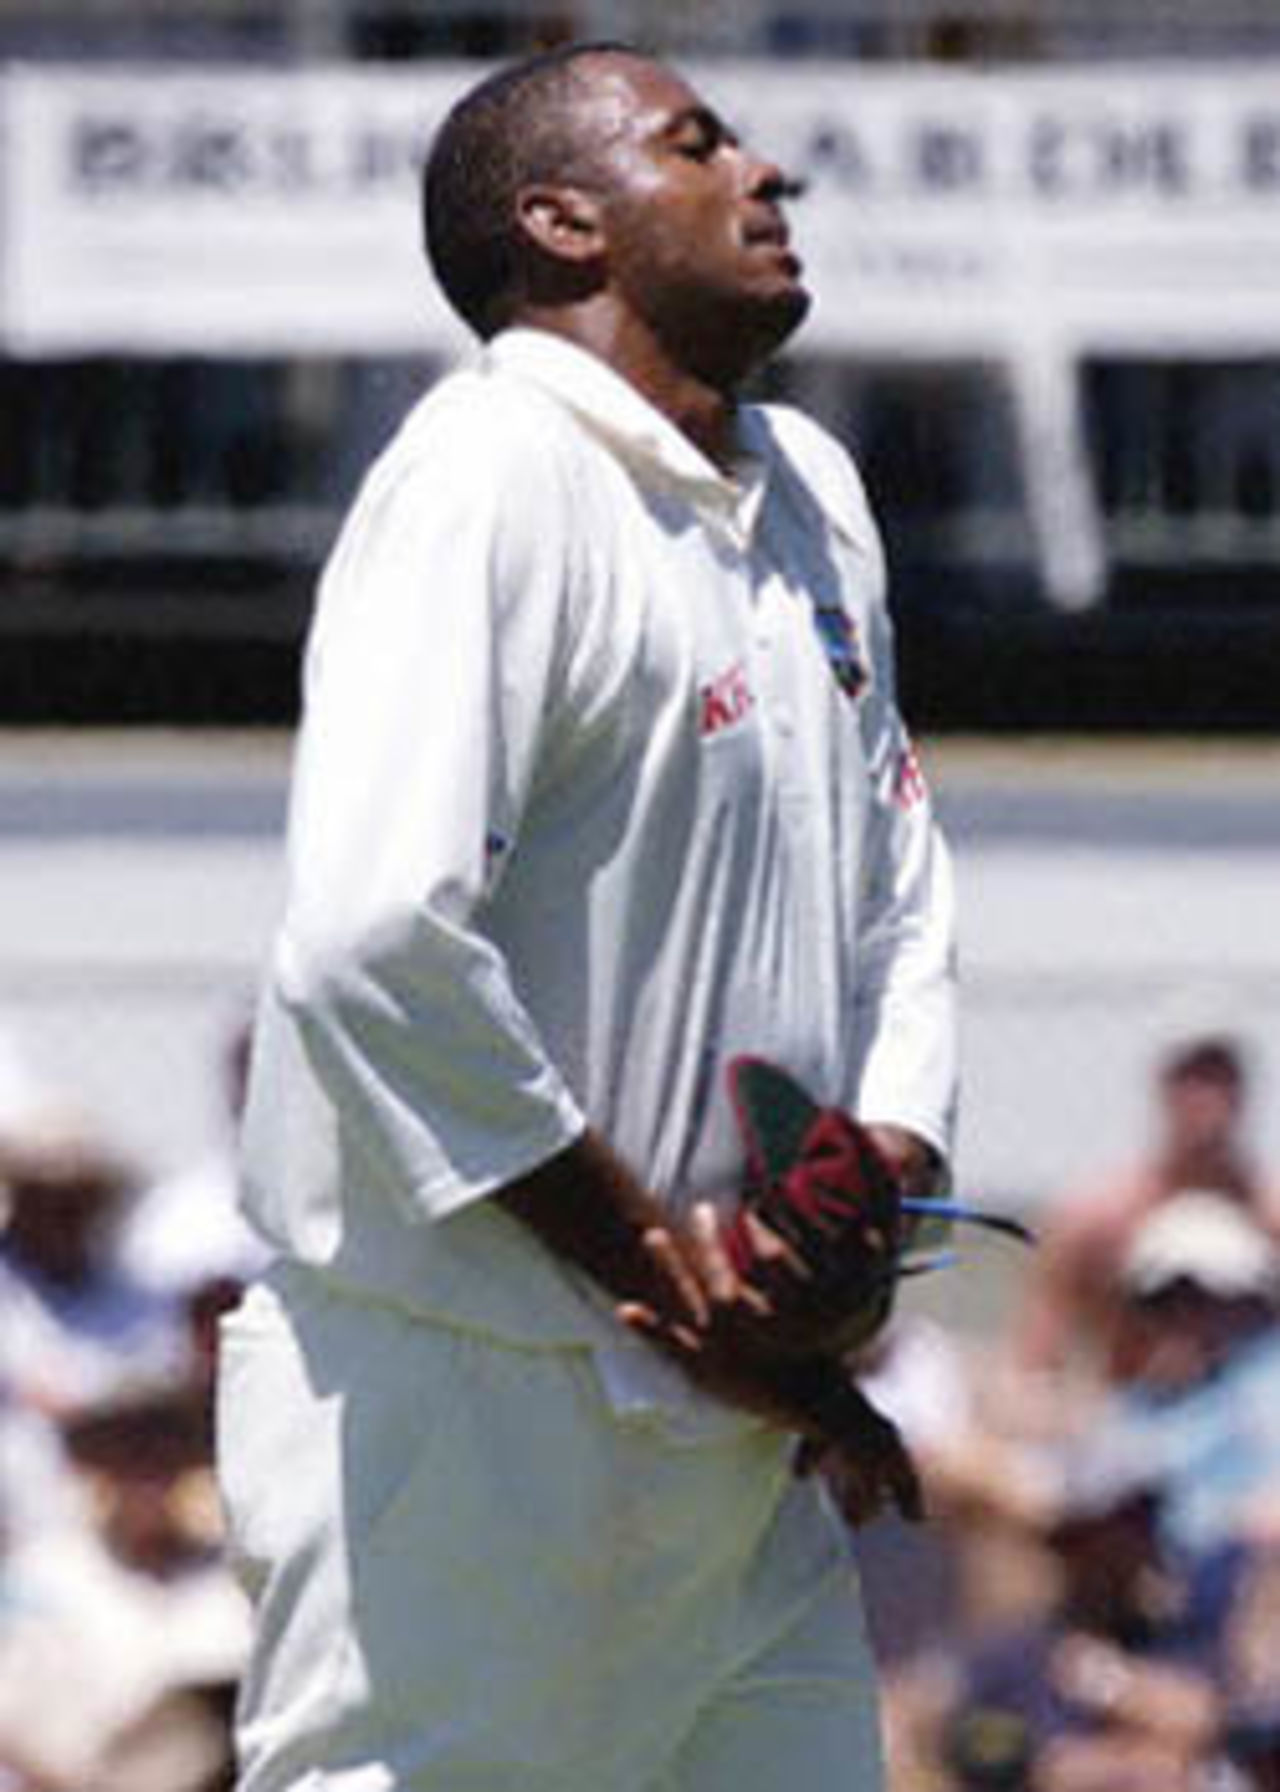 Walsh writhing in pain as he leaves the field, The Frank Worrell Trophy, 2000/01, 2nd Test, Australia v West Indies, W.A.C.A. Ground, Perth, 01-05 December 2000 (Day 2).